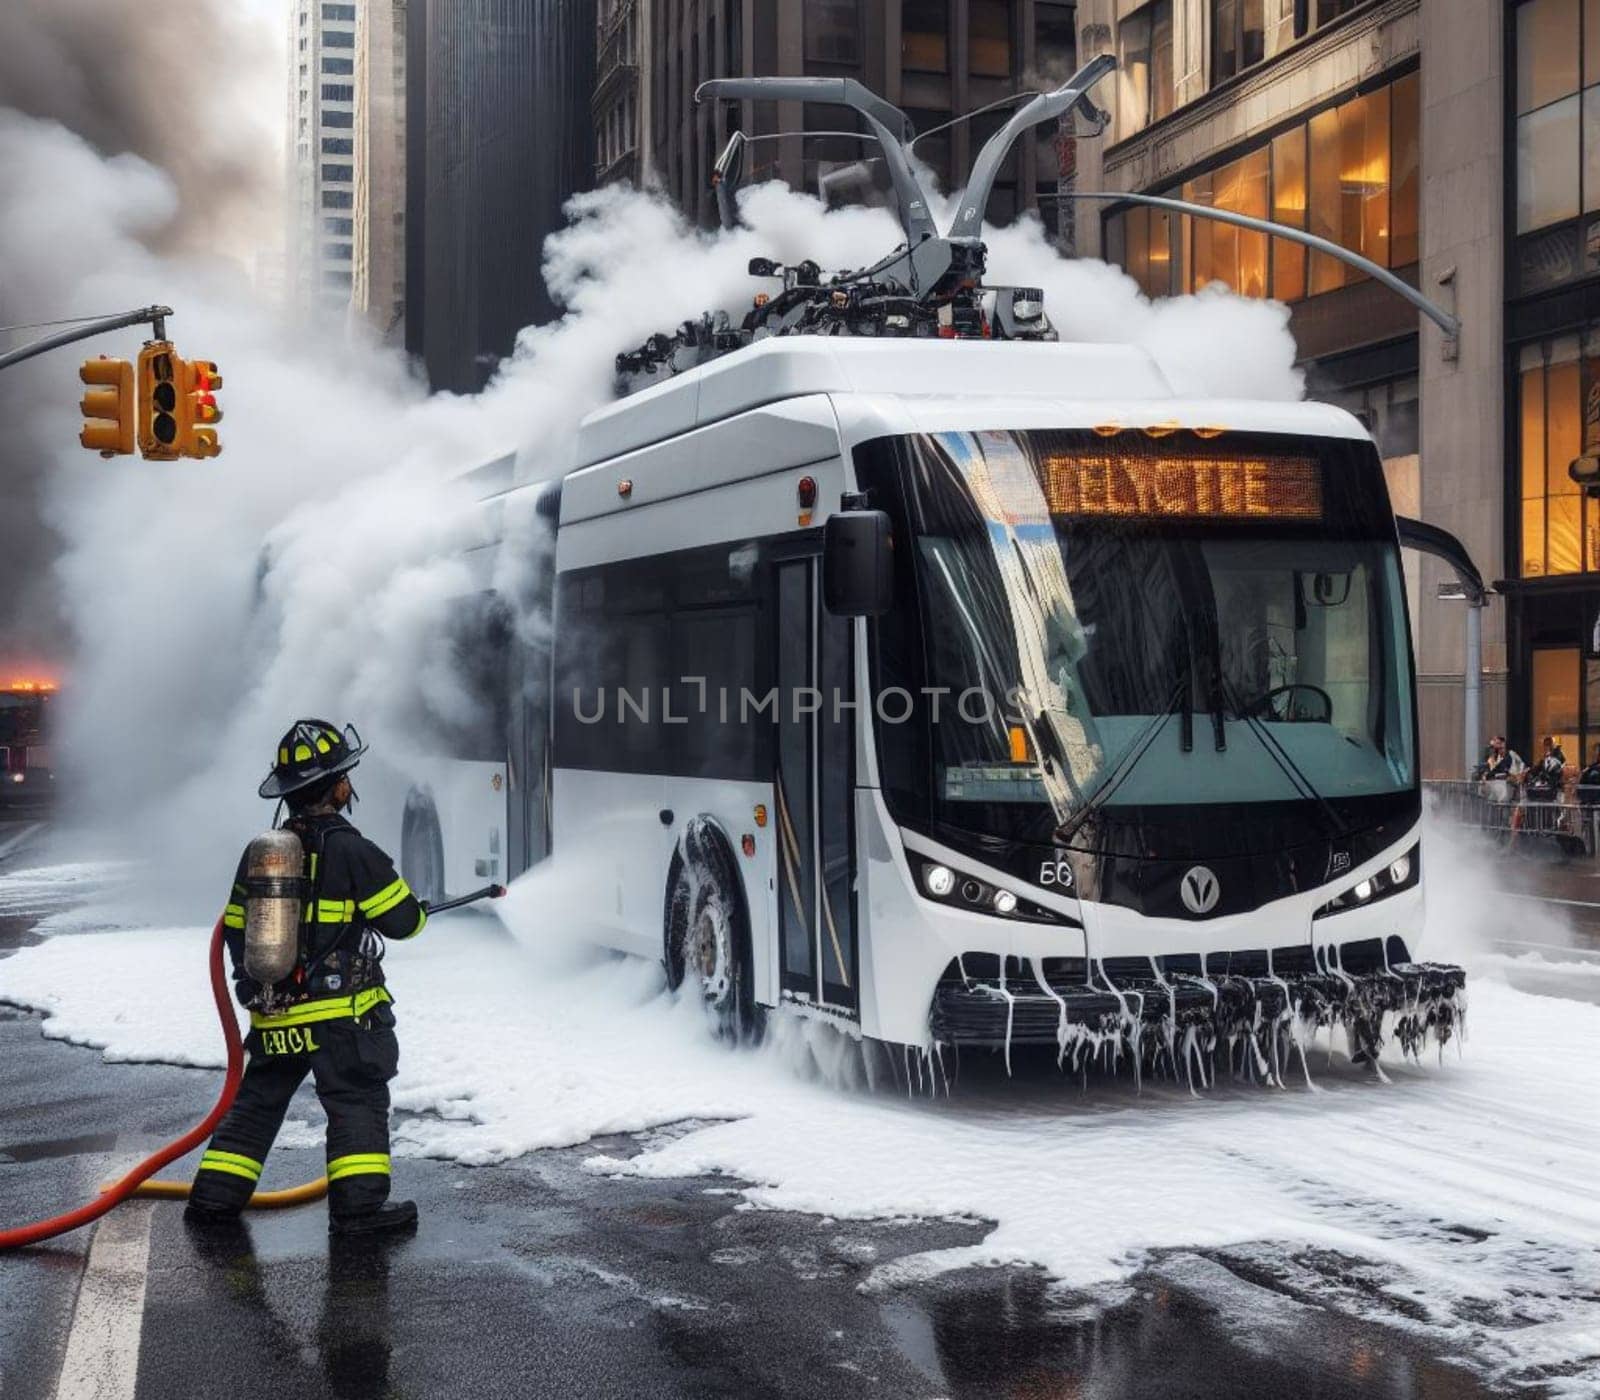 electric hybrid city bus burn bottom chasis, firefighter apply foam to extinguish flames big smoke ai generated